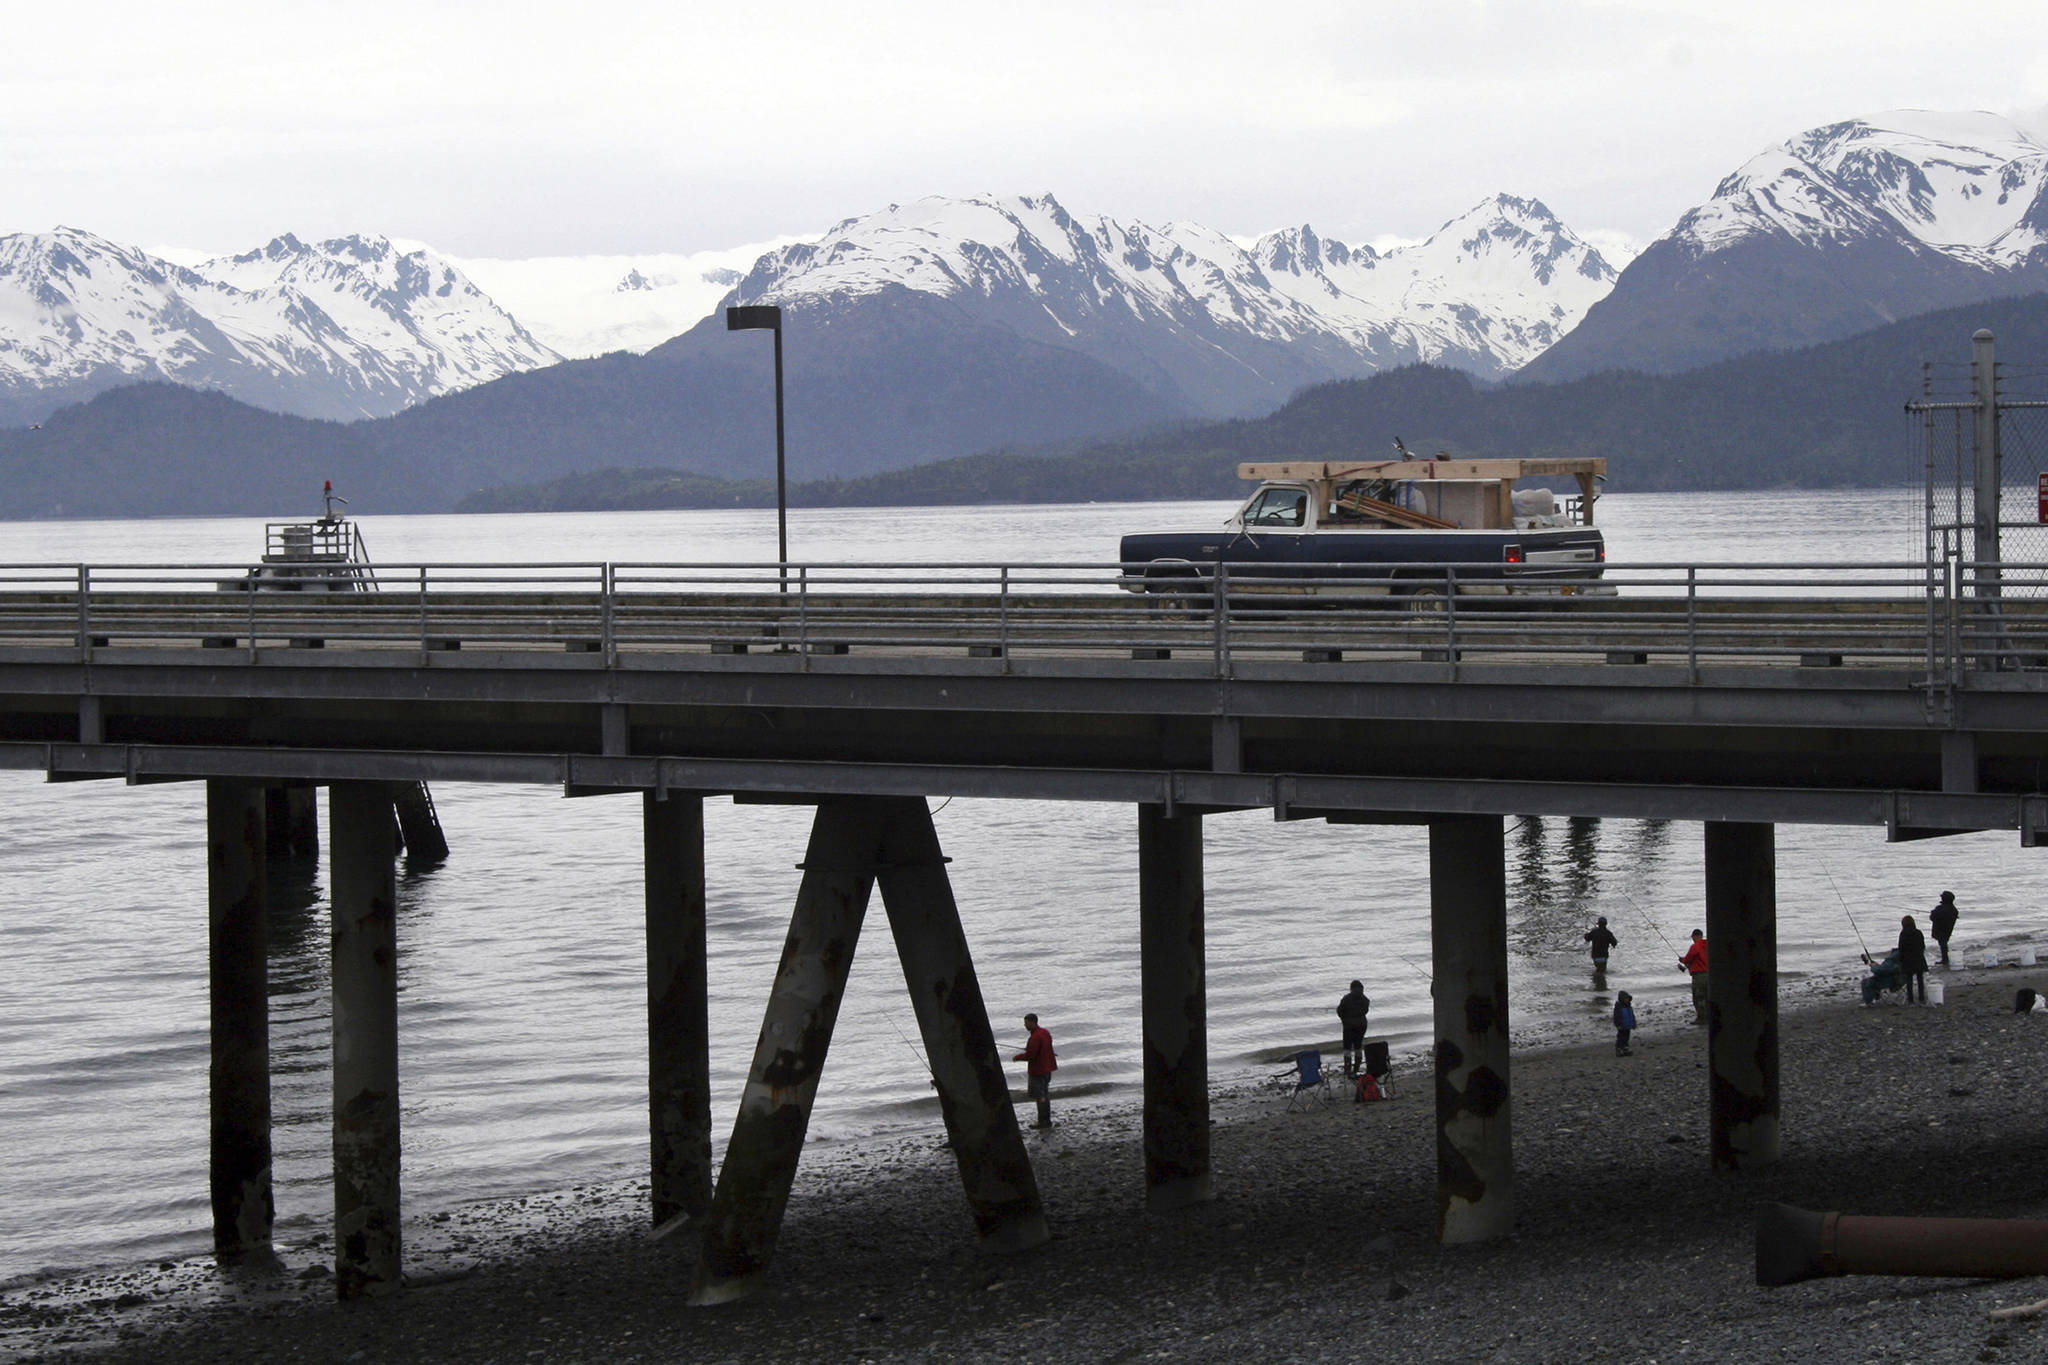 FILE - In this May 24, 2015, file photo, a vehicle drives on a pier to be loaded onto an Alaska state ferry while people fish underneath the pier in Homer, Alaska. The U.S. Supreme Court will hear oral arguments Monday, April 19, 2021, in a case that will determine who is eligible to receive more than $530 million in federal virus relief funding set aside for tribes more than a year ago. More than a dozen Native American tribes sued the U.S. Treasury Department to keep the money out of the hands of Alaska Native corporations, which provide services to Alaska Natives but do not have a government-to-government relationship with the United States. (AP Photo/Mark Thiessen, File)